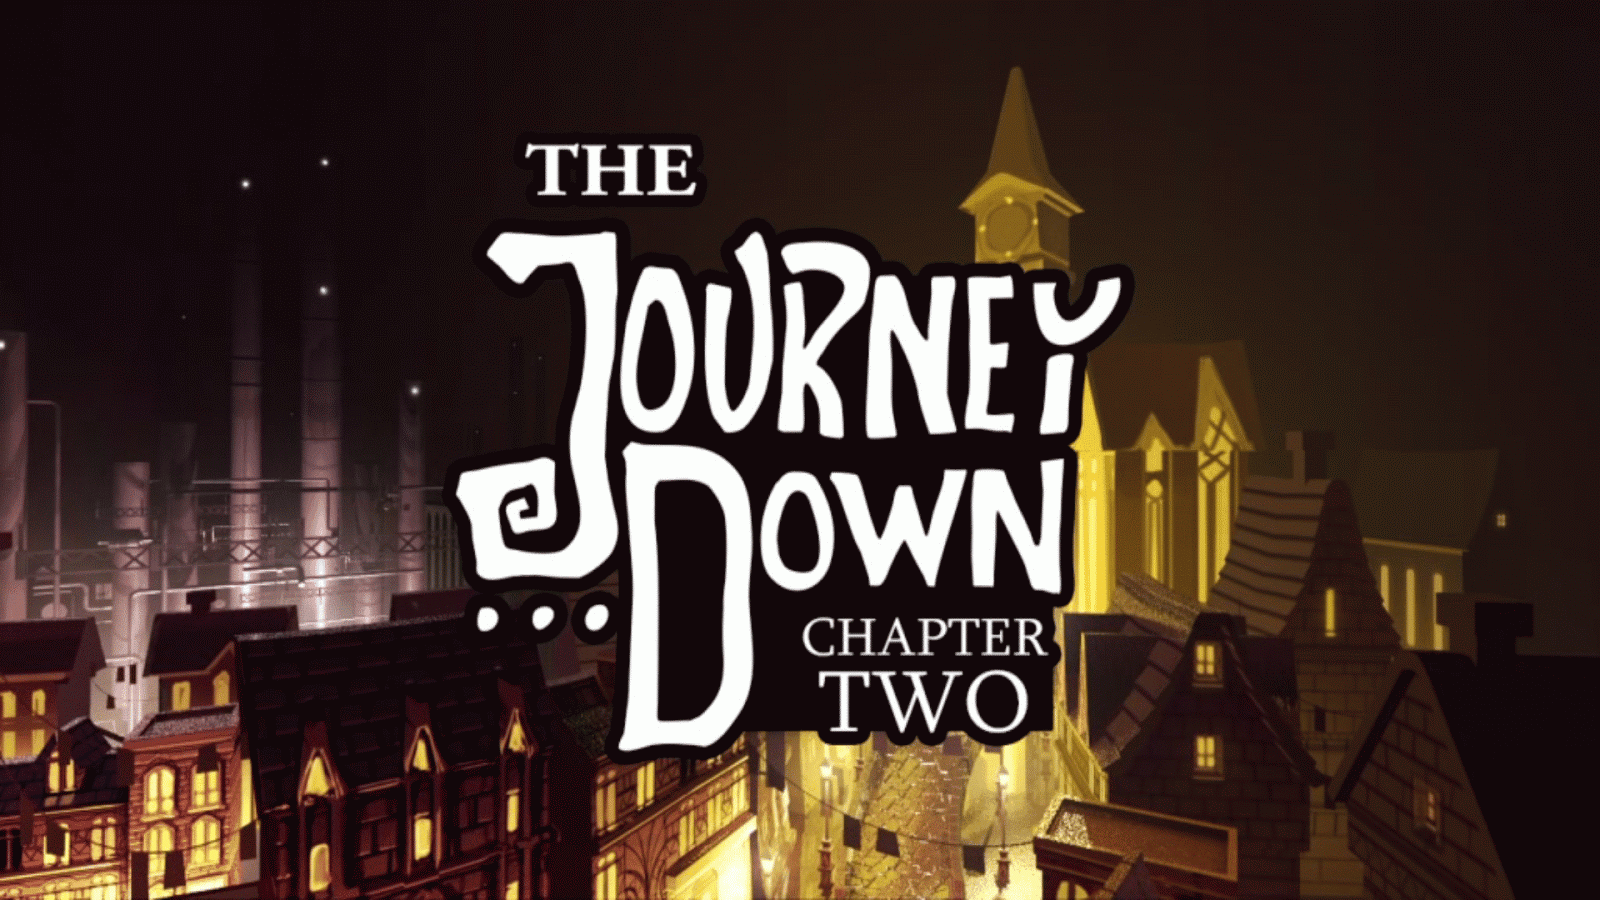 The Journey down Chapter two. The Journey down Chapter one. The Journey. The Journey down Xbox.